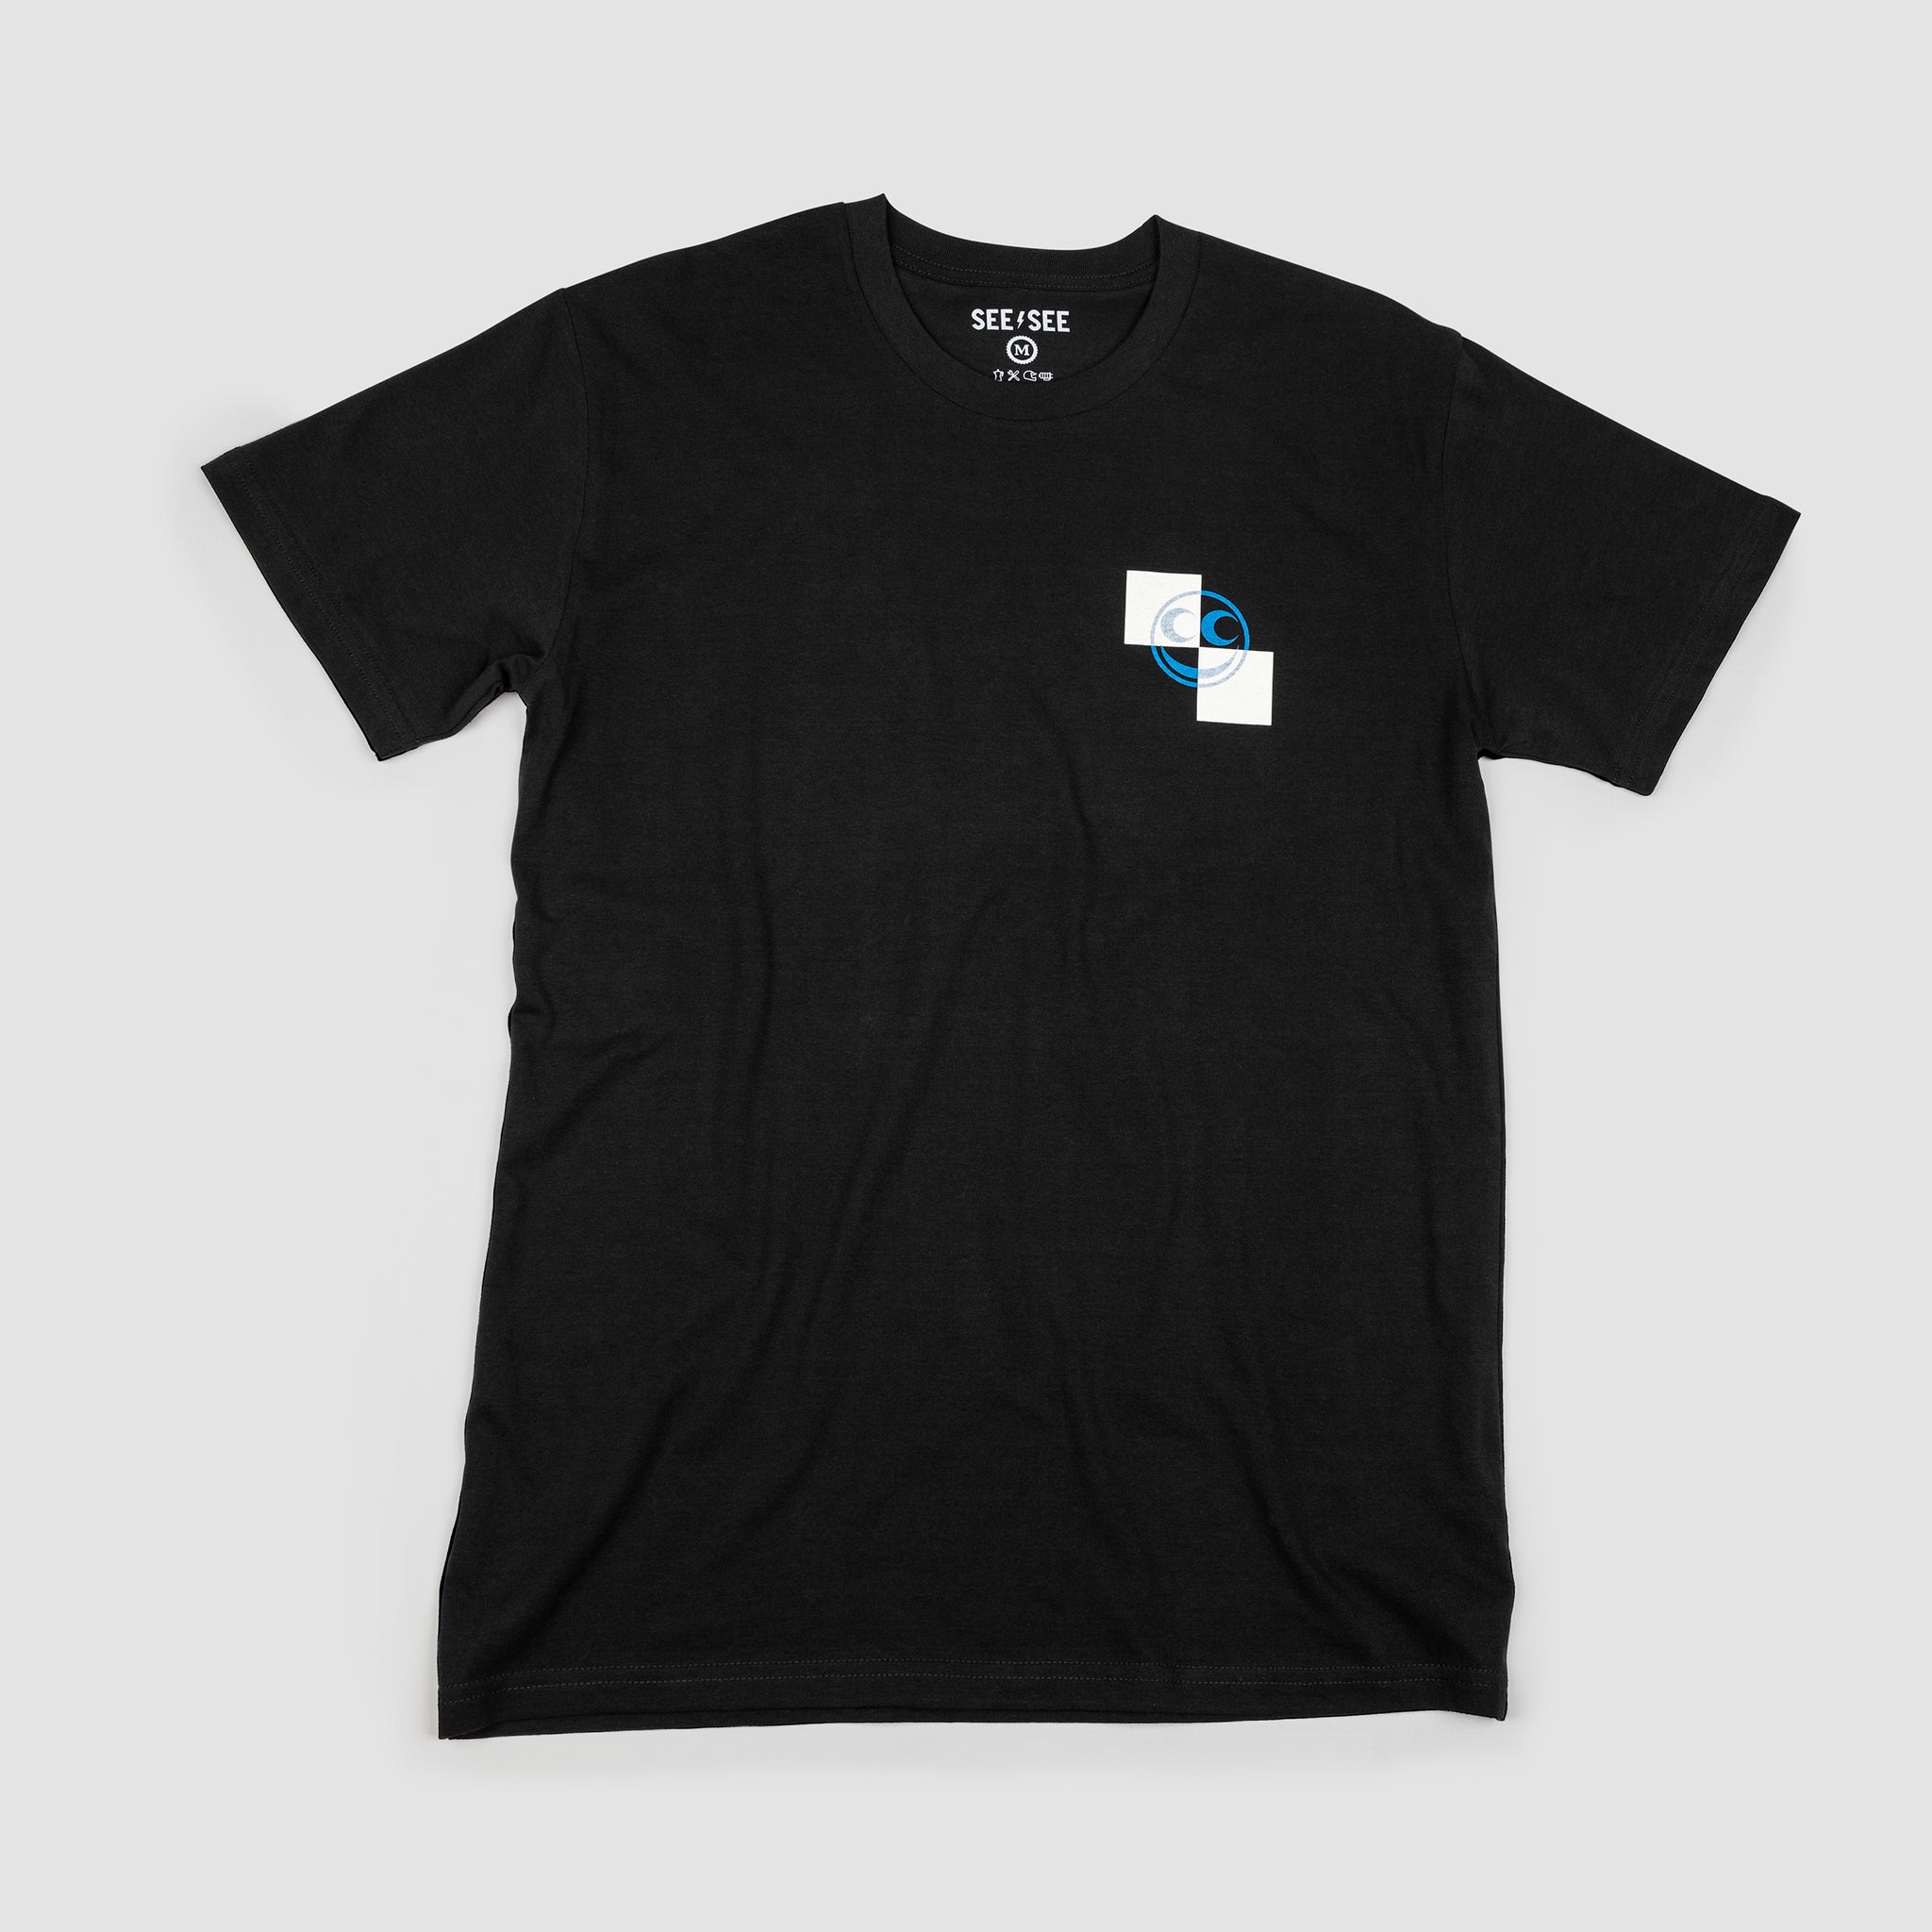 Black unisex t-shirt with white and black checkered left breast detail with blue vern smiley overlay.